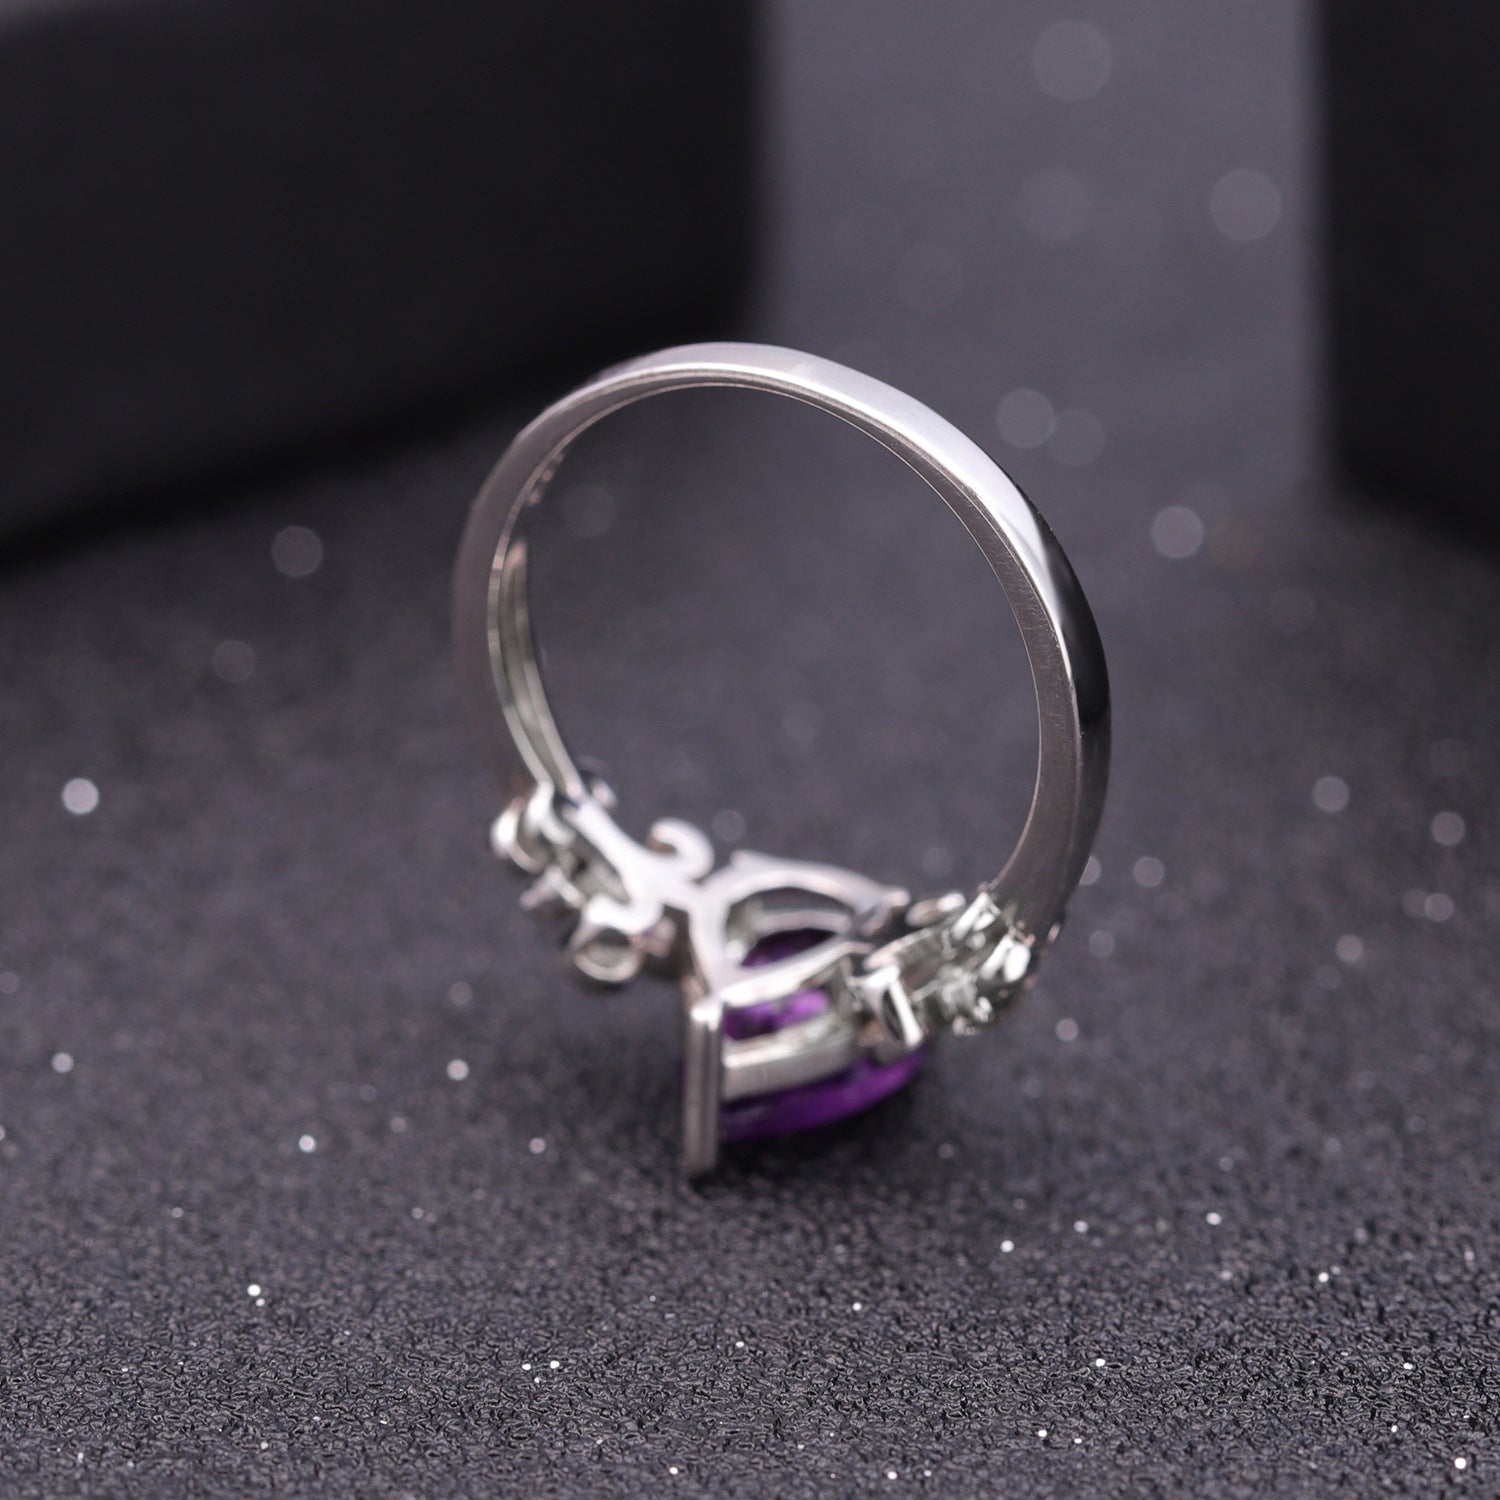 European and American Fashion Natural Amethyst with Pear Drop Silver Three Prongs Ring for Women